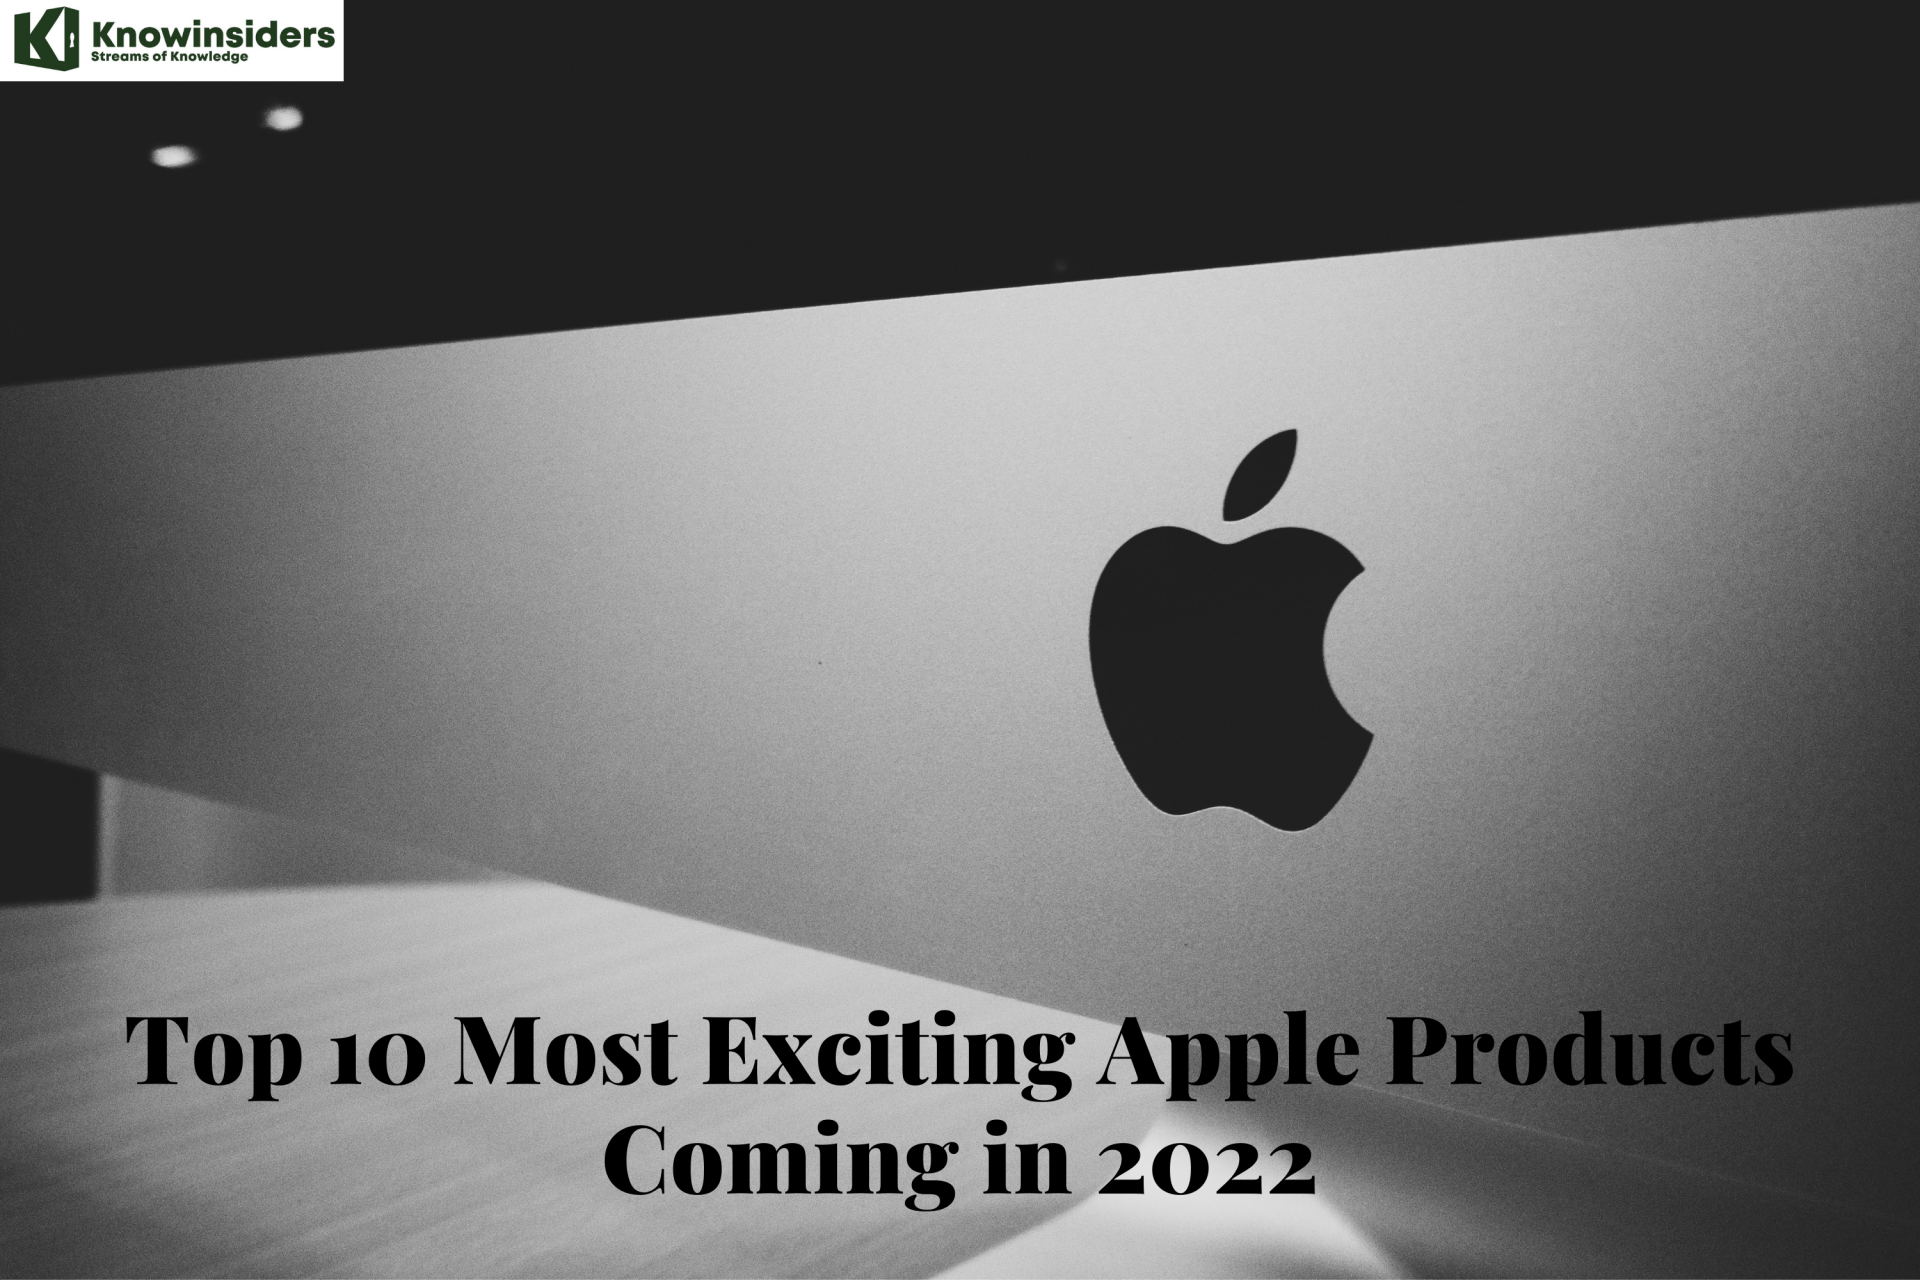 Top 10 Most Exciting Apple Products Coming in 2022